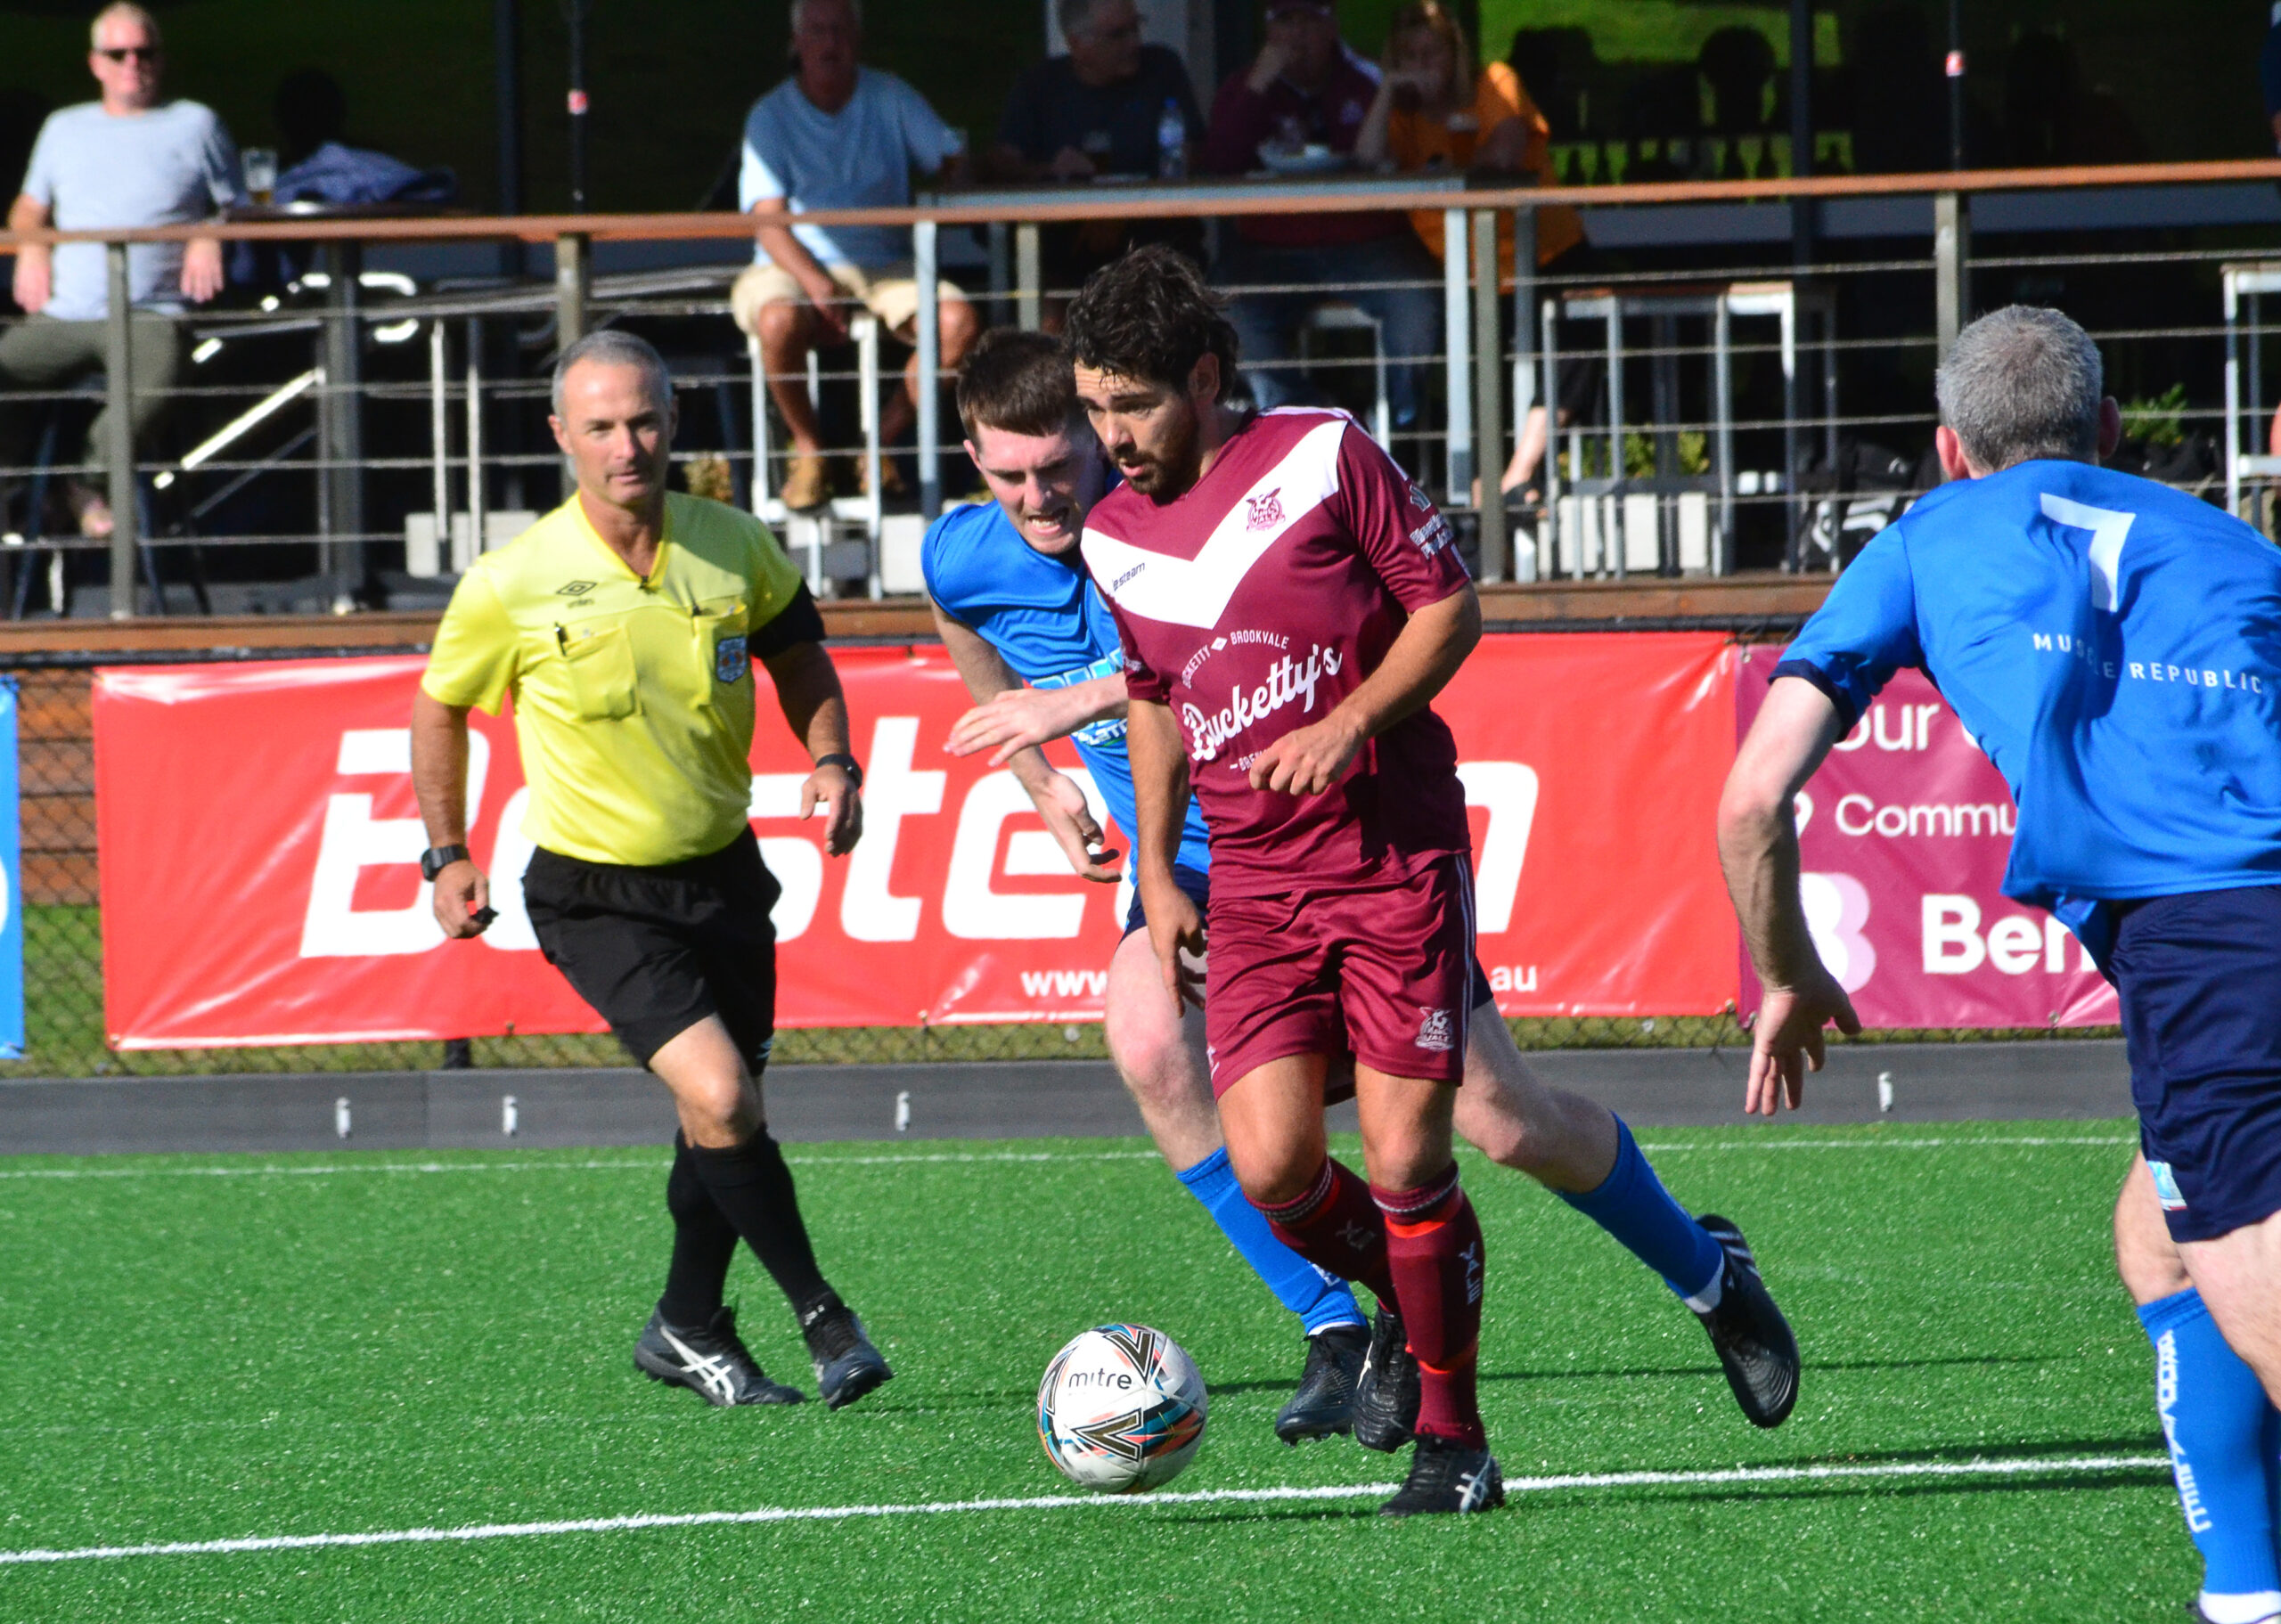 Men's Premier League Round 7: Action from the 2023 MWFA Men's Premier League Round 5 game between Brookvale and Manly Vale at Cromer Park. Photo credit: Graeme Bolton